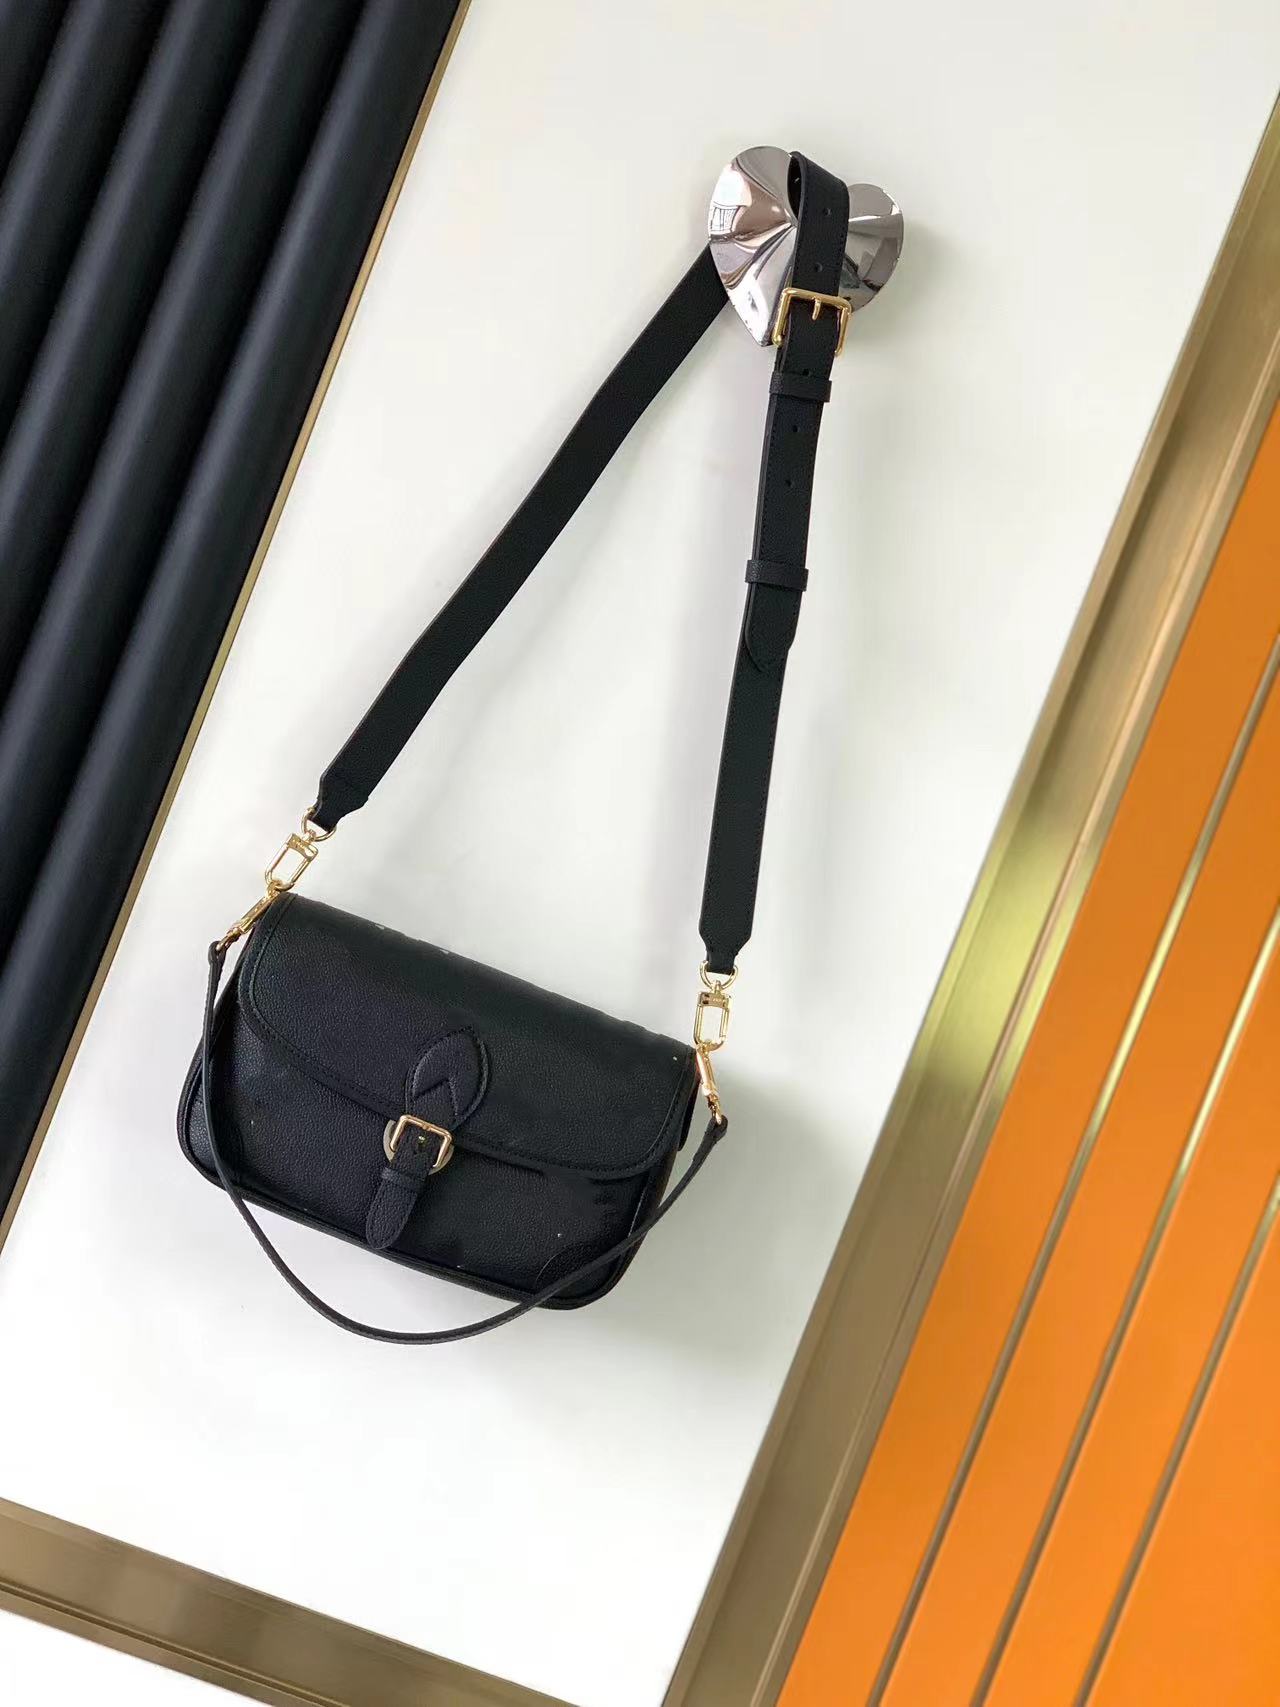 Designer Bag Handbag leather keycase. The handle 2023design is convenient for carrying or carrying, and the detachable shoulder strap allows for shoulder back and box